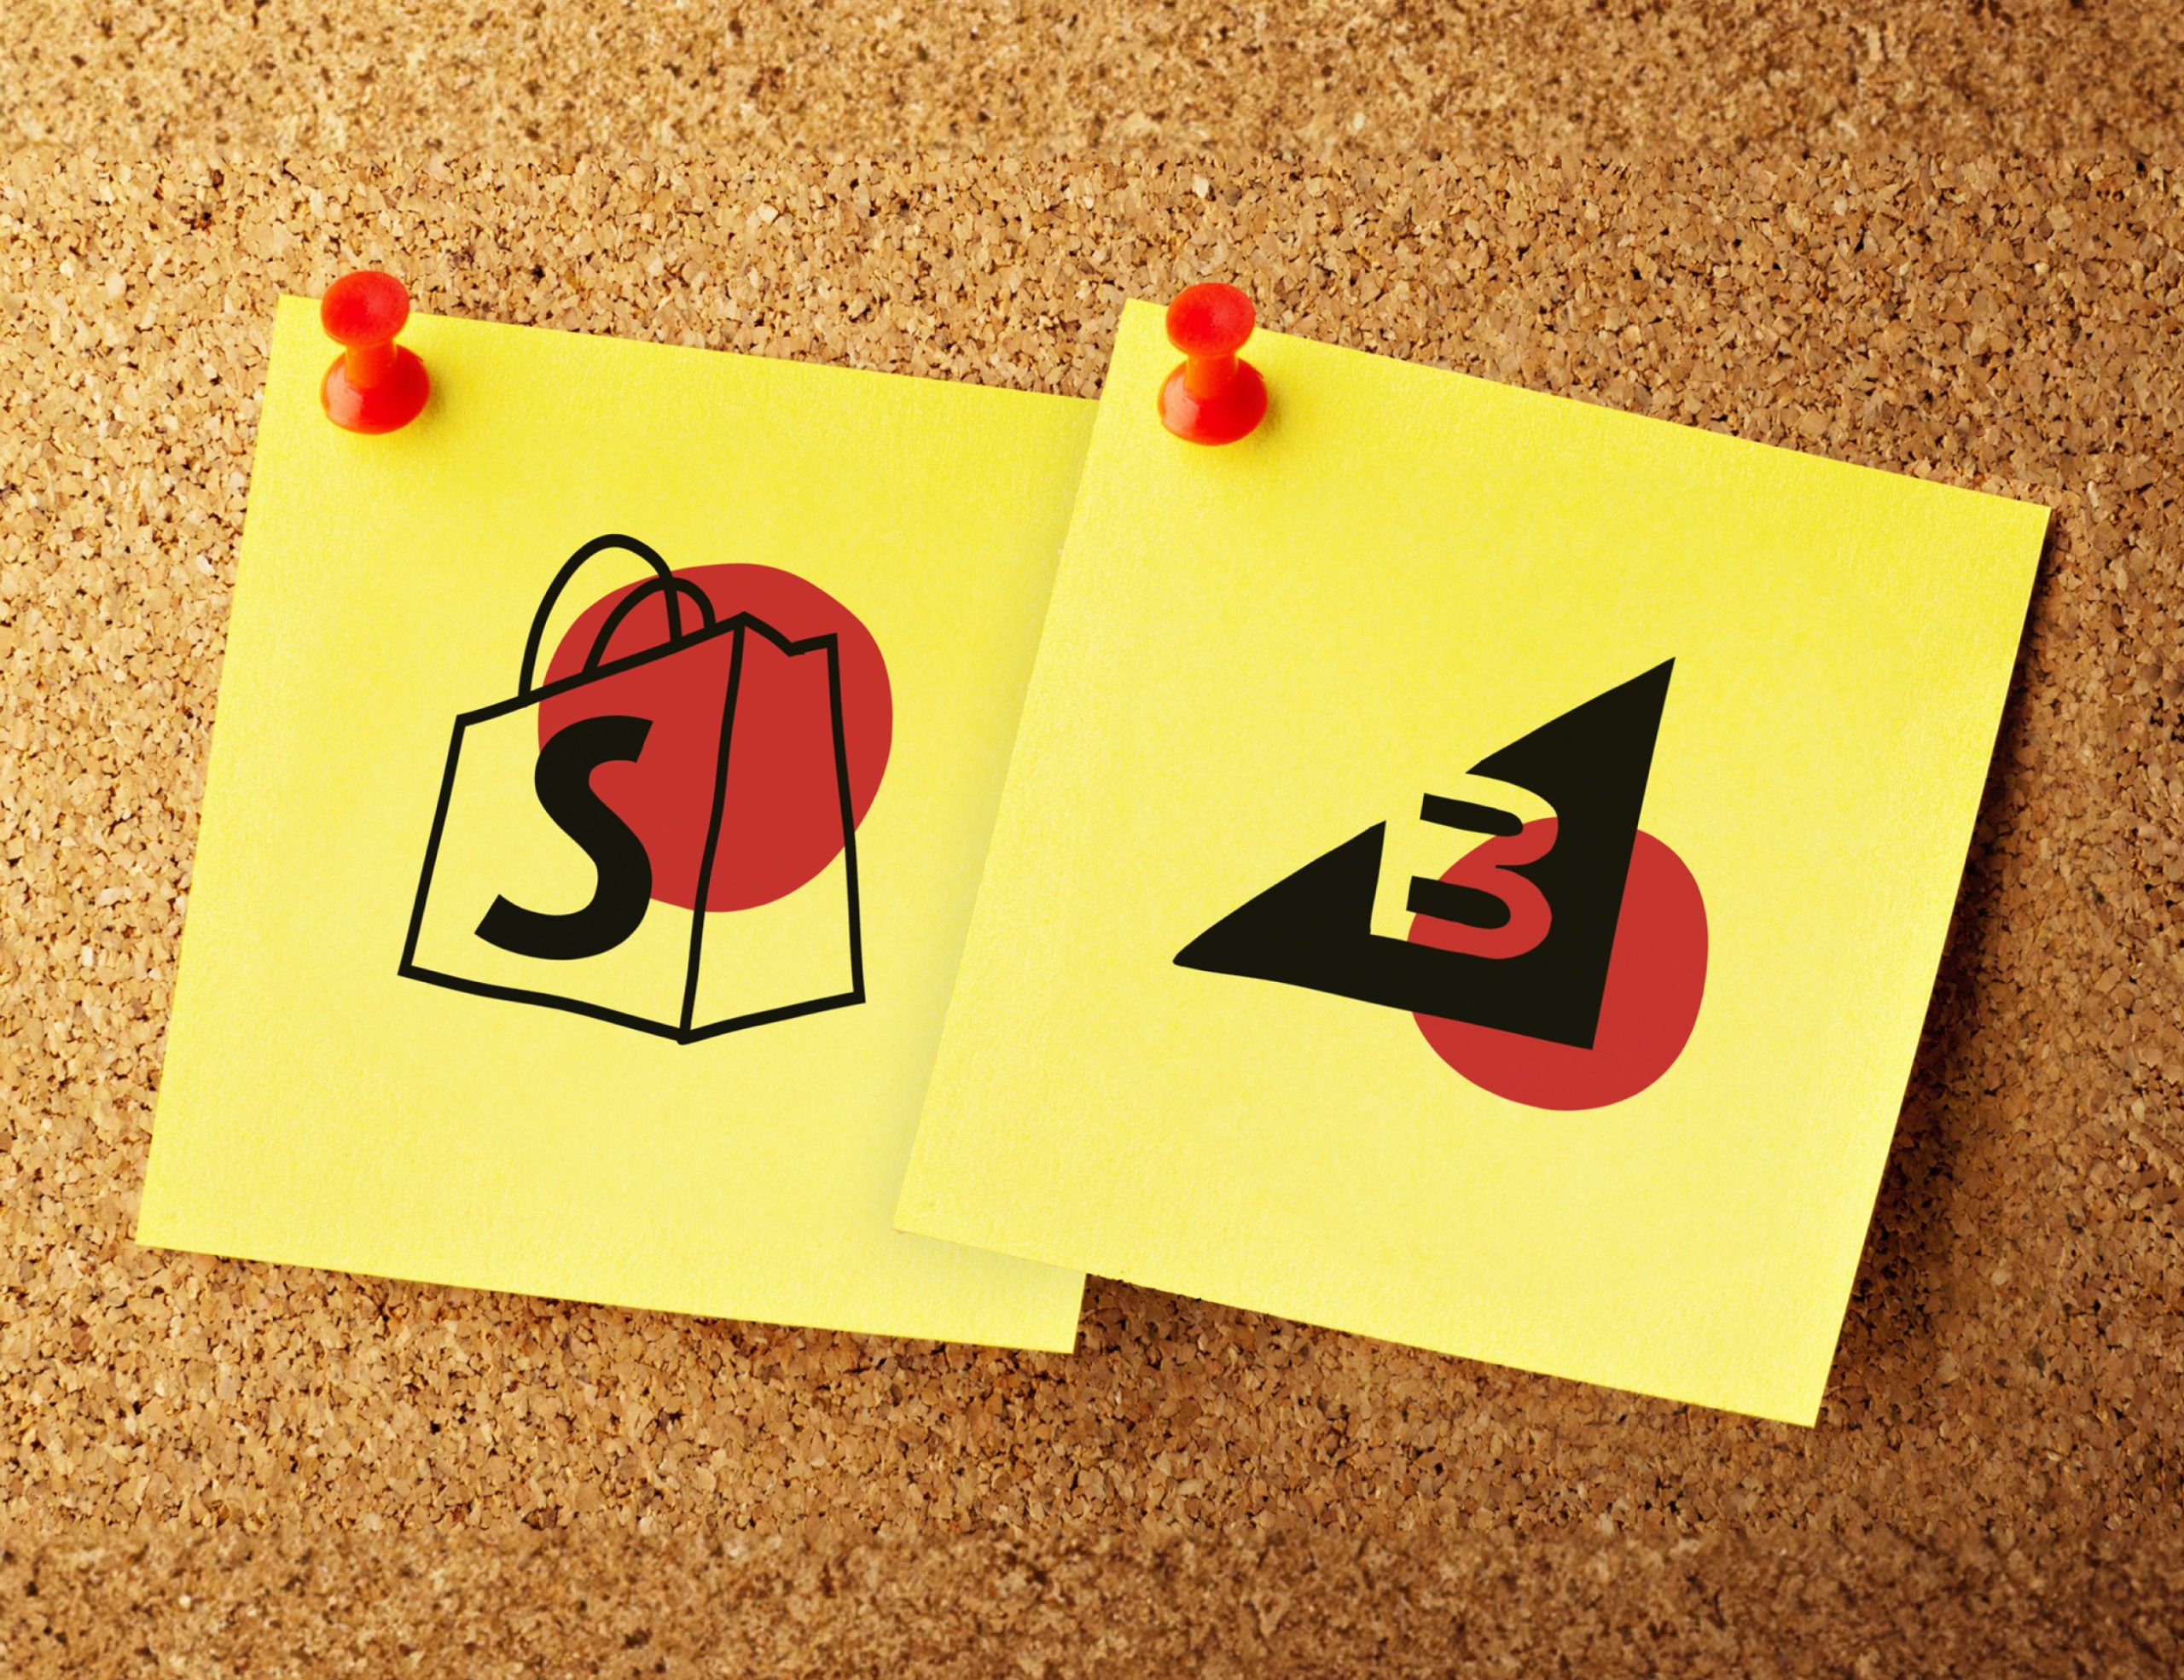 Image showing the BigCommerce and Shopify logos on post-it notes